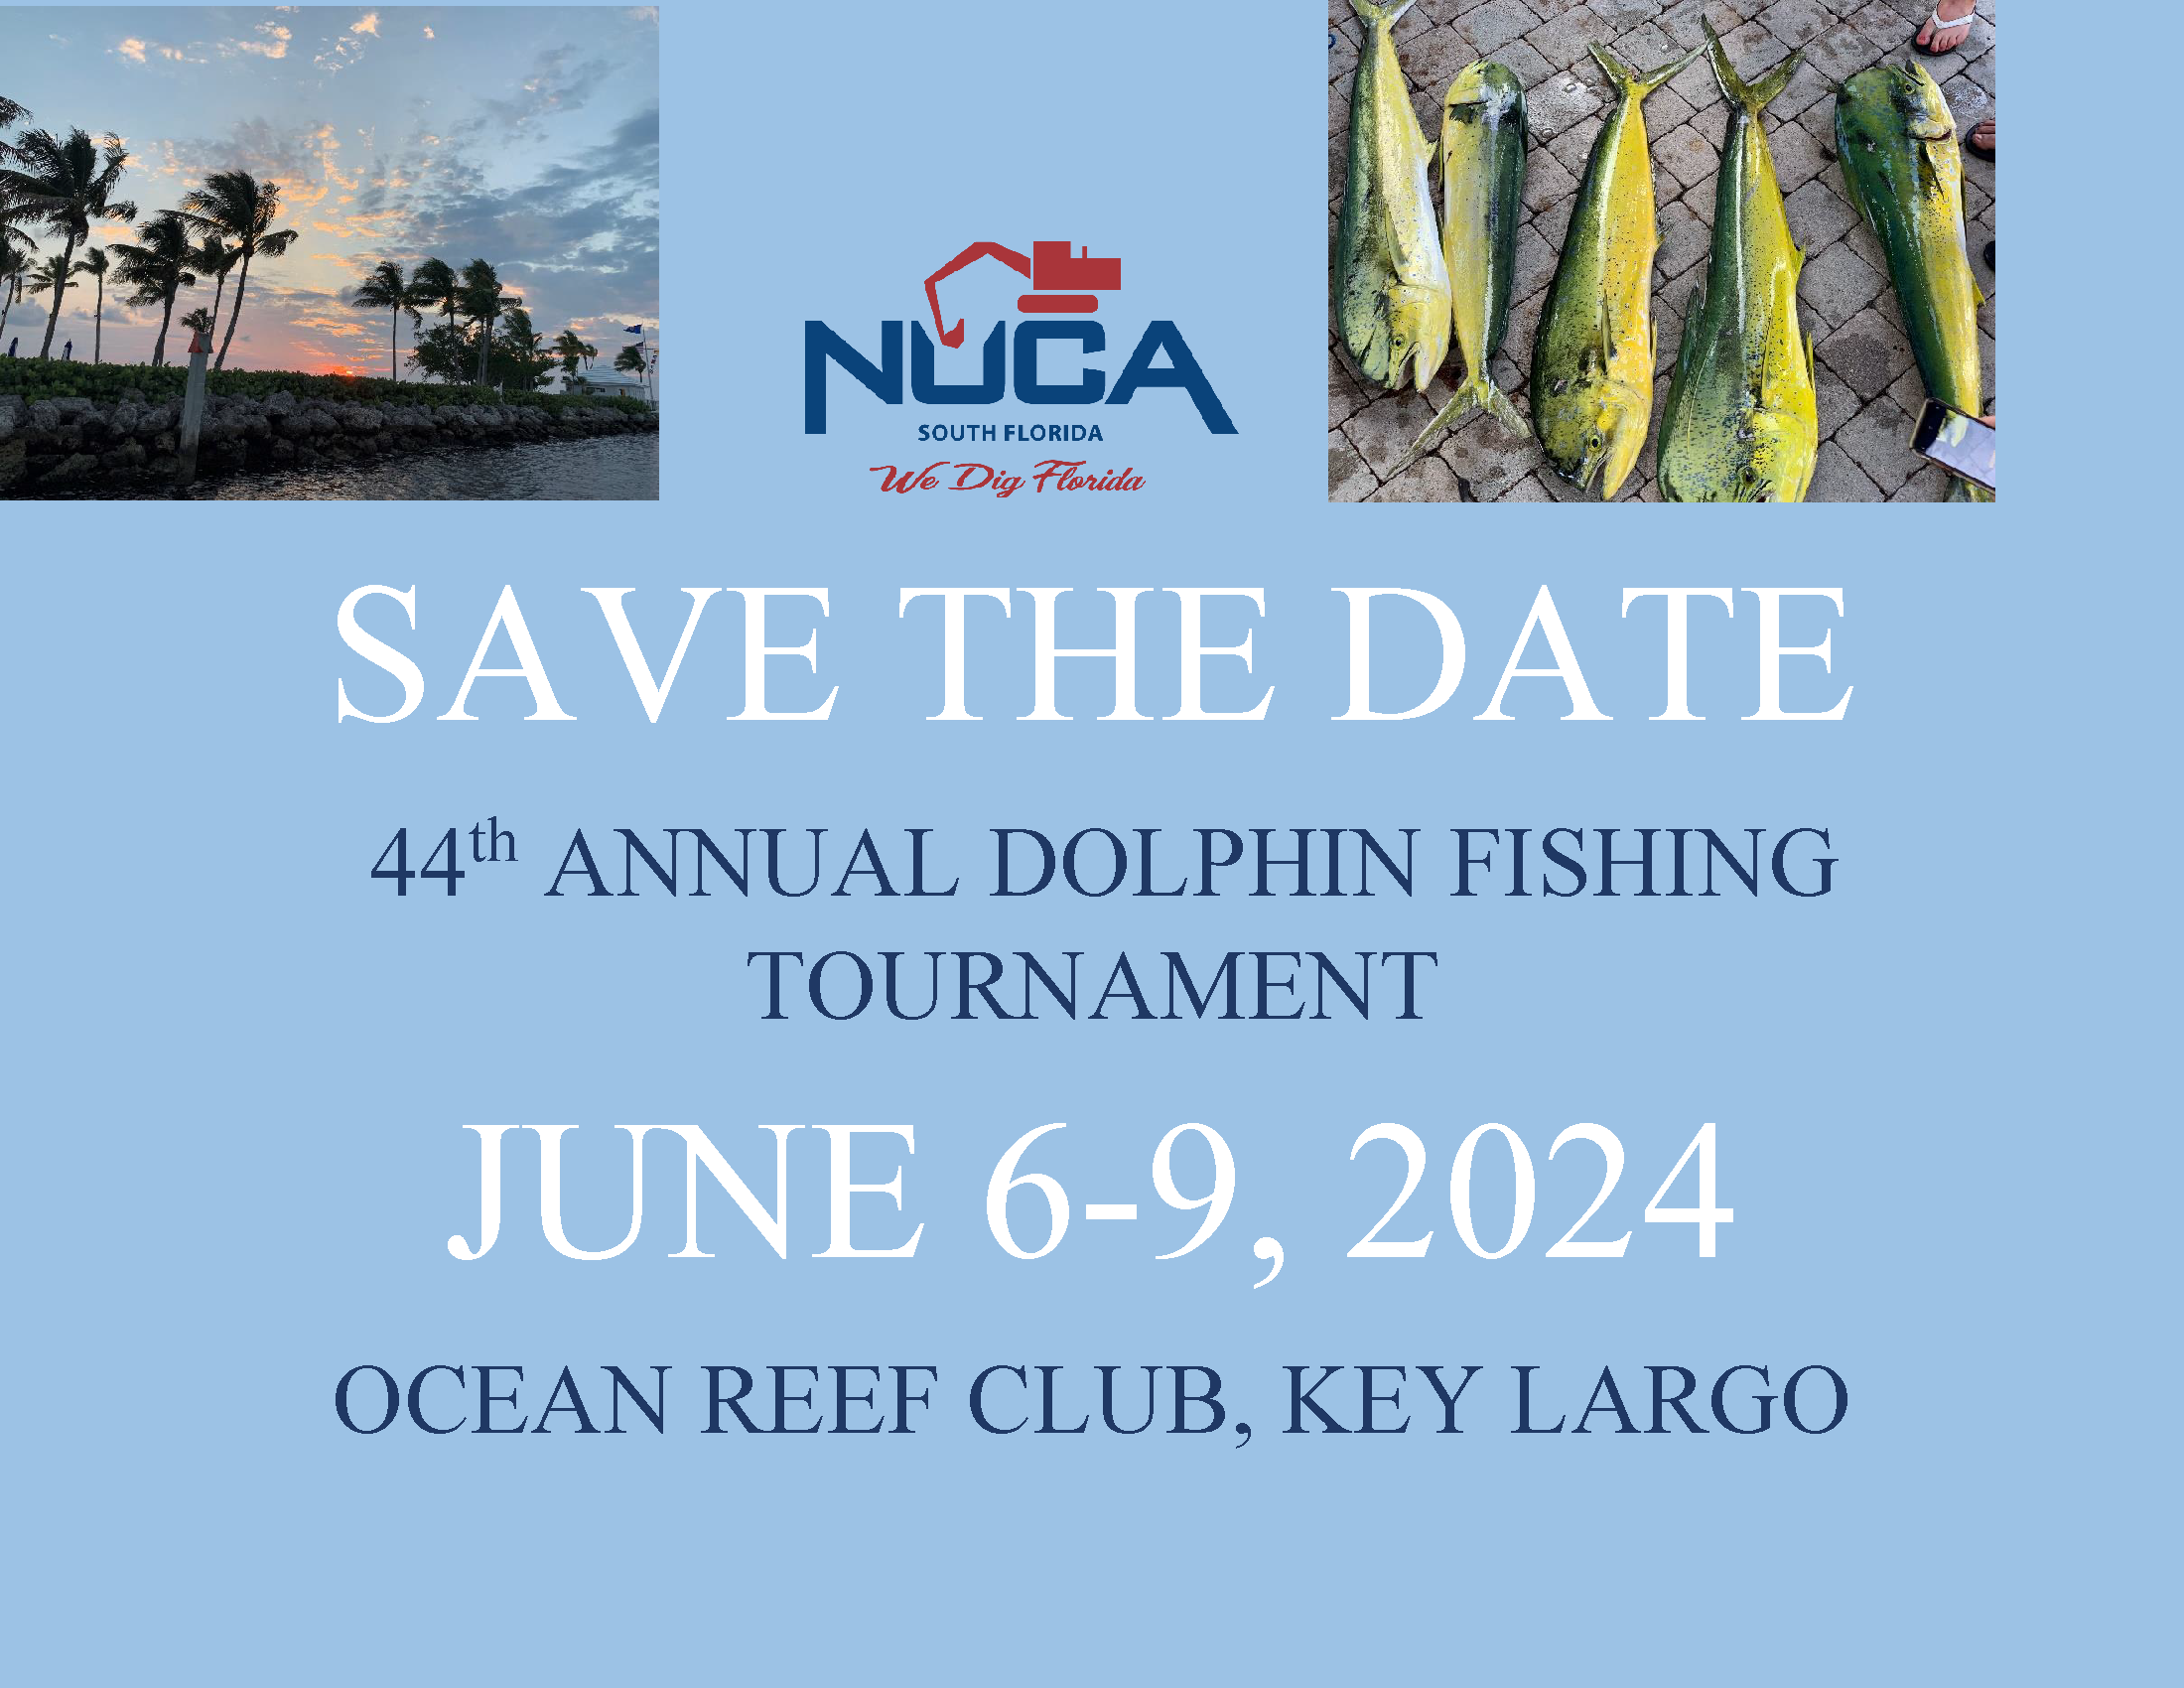 NUCA of South Florida 44th Annual Dolphin Fishing Tournament